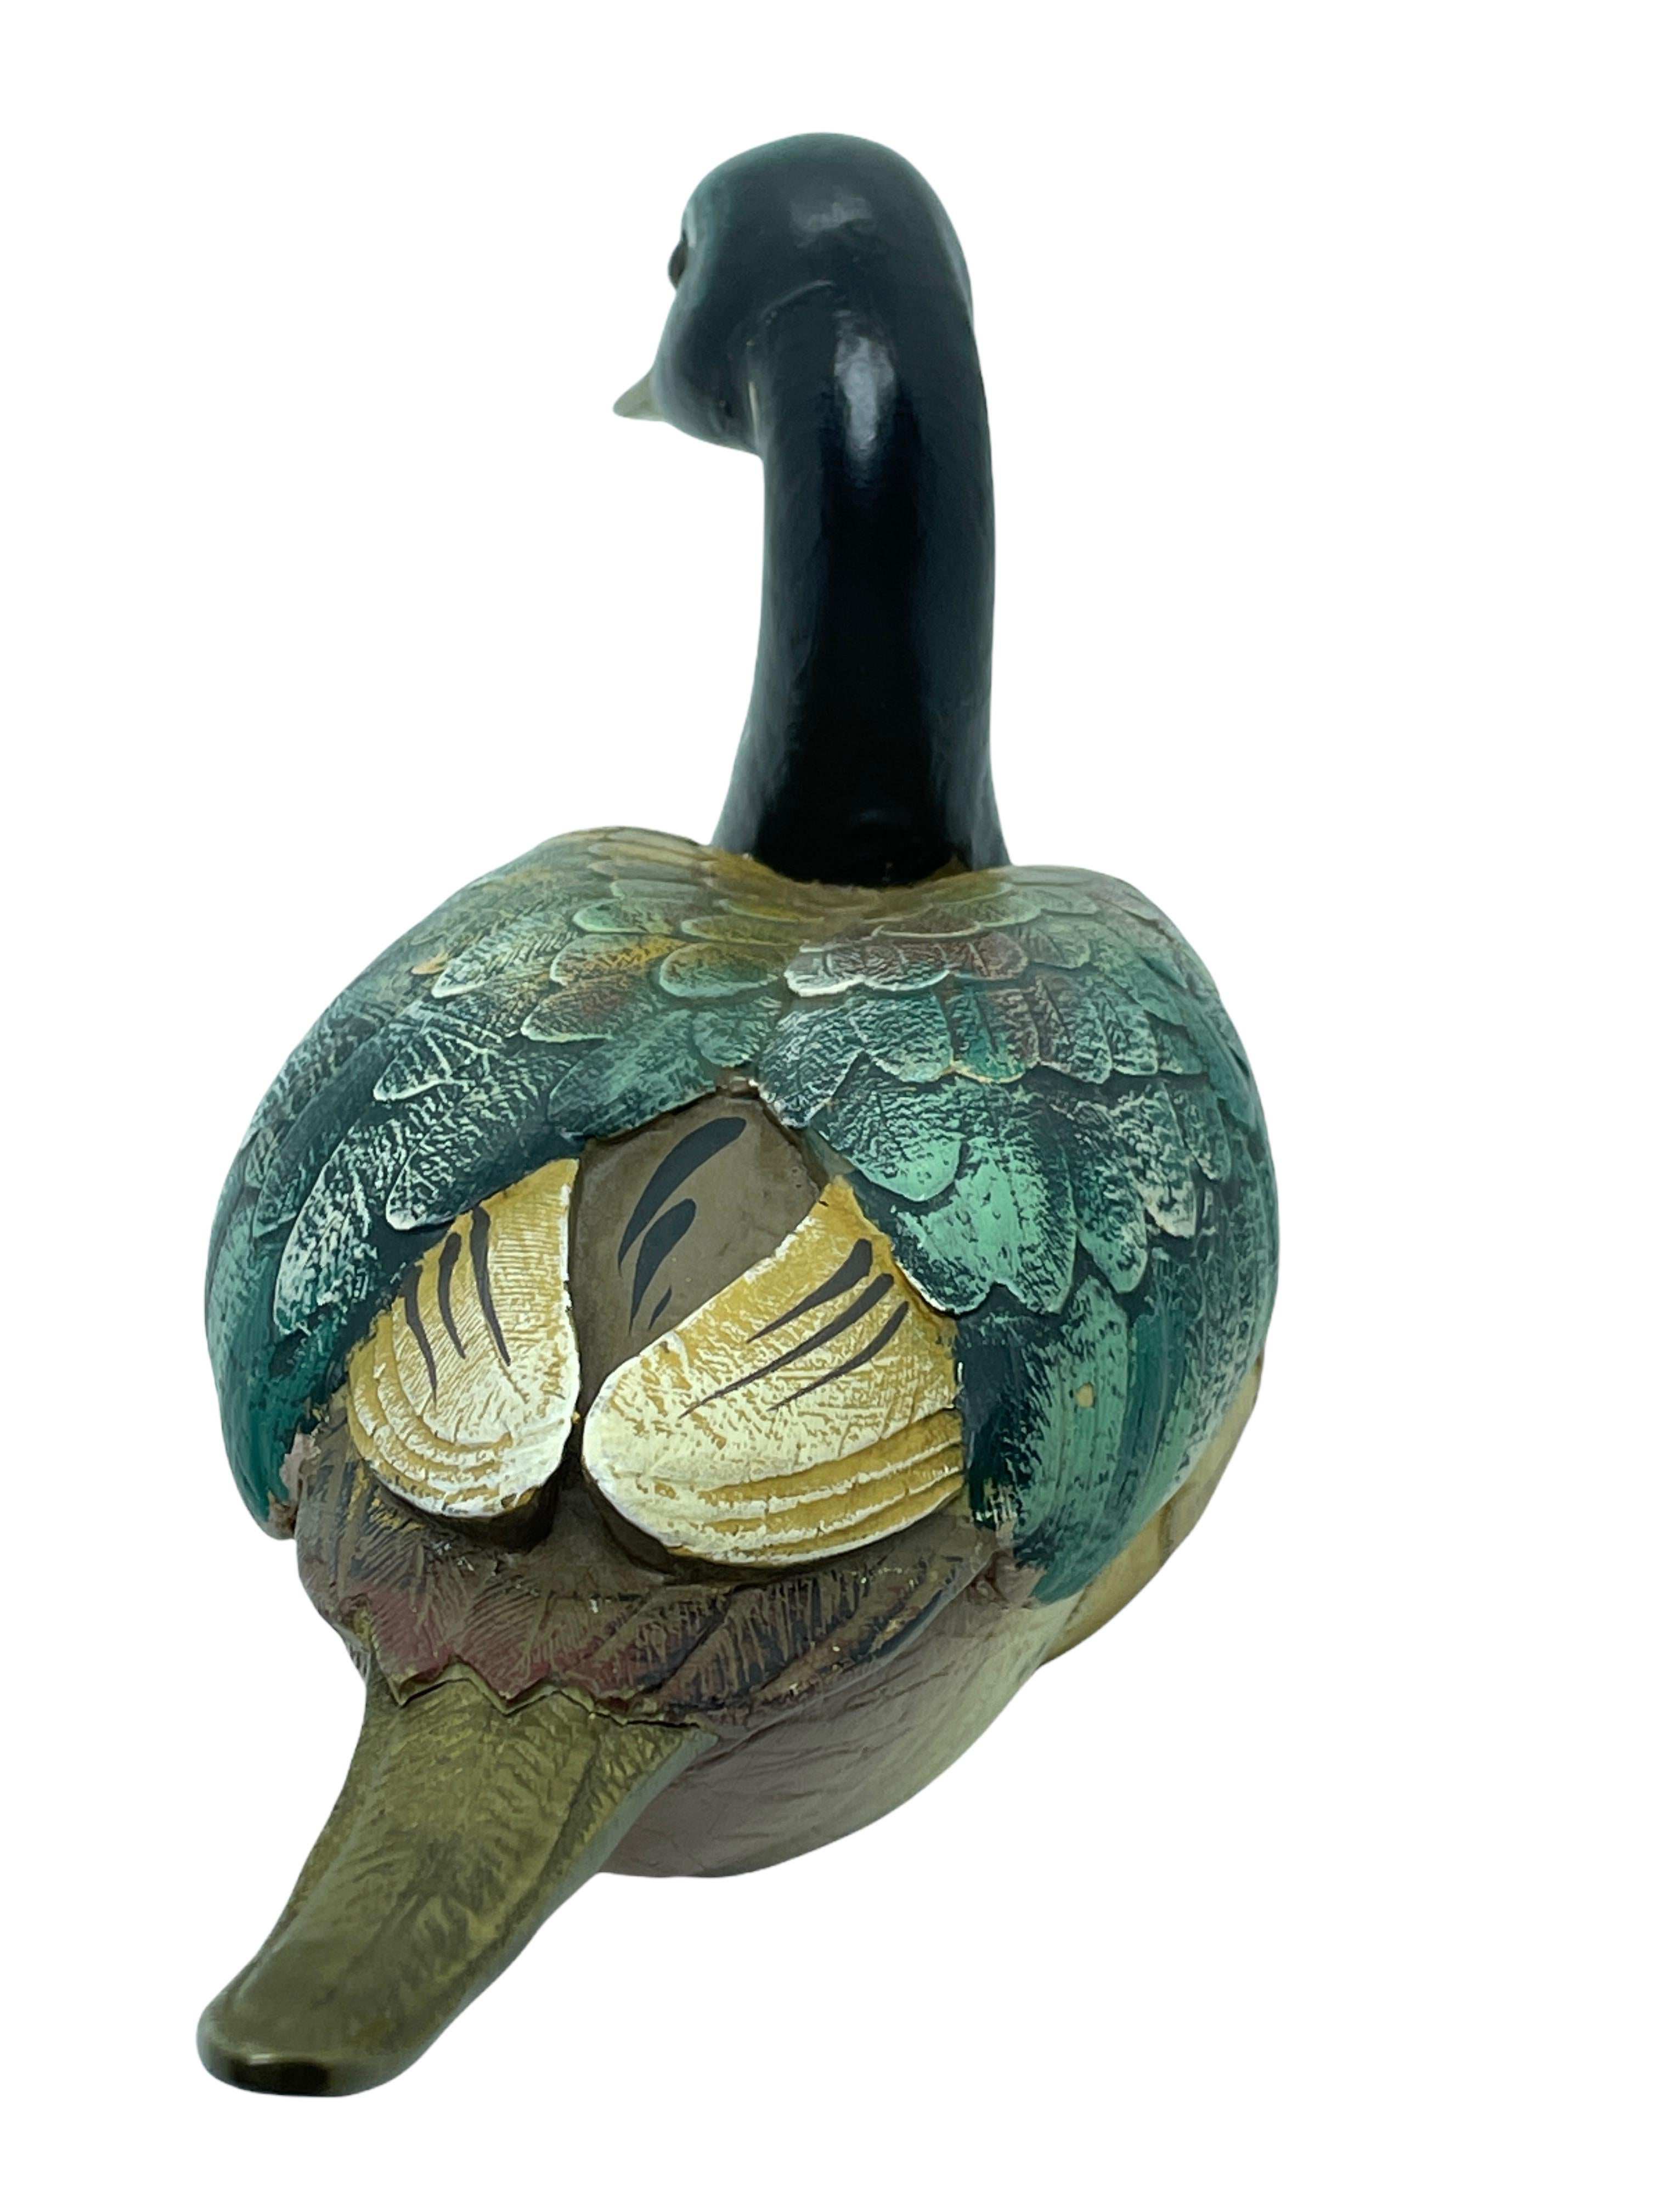 Hollywood Regency Brass Accented Hand Painted Duck Decoy Figurine Statue, 1980s Malevolti Italy For Sale